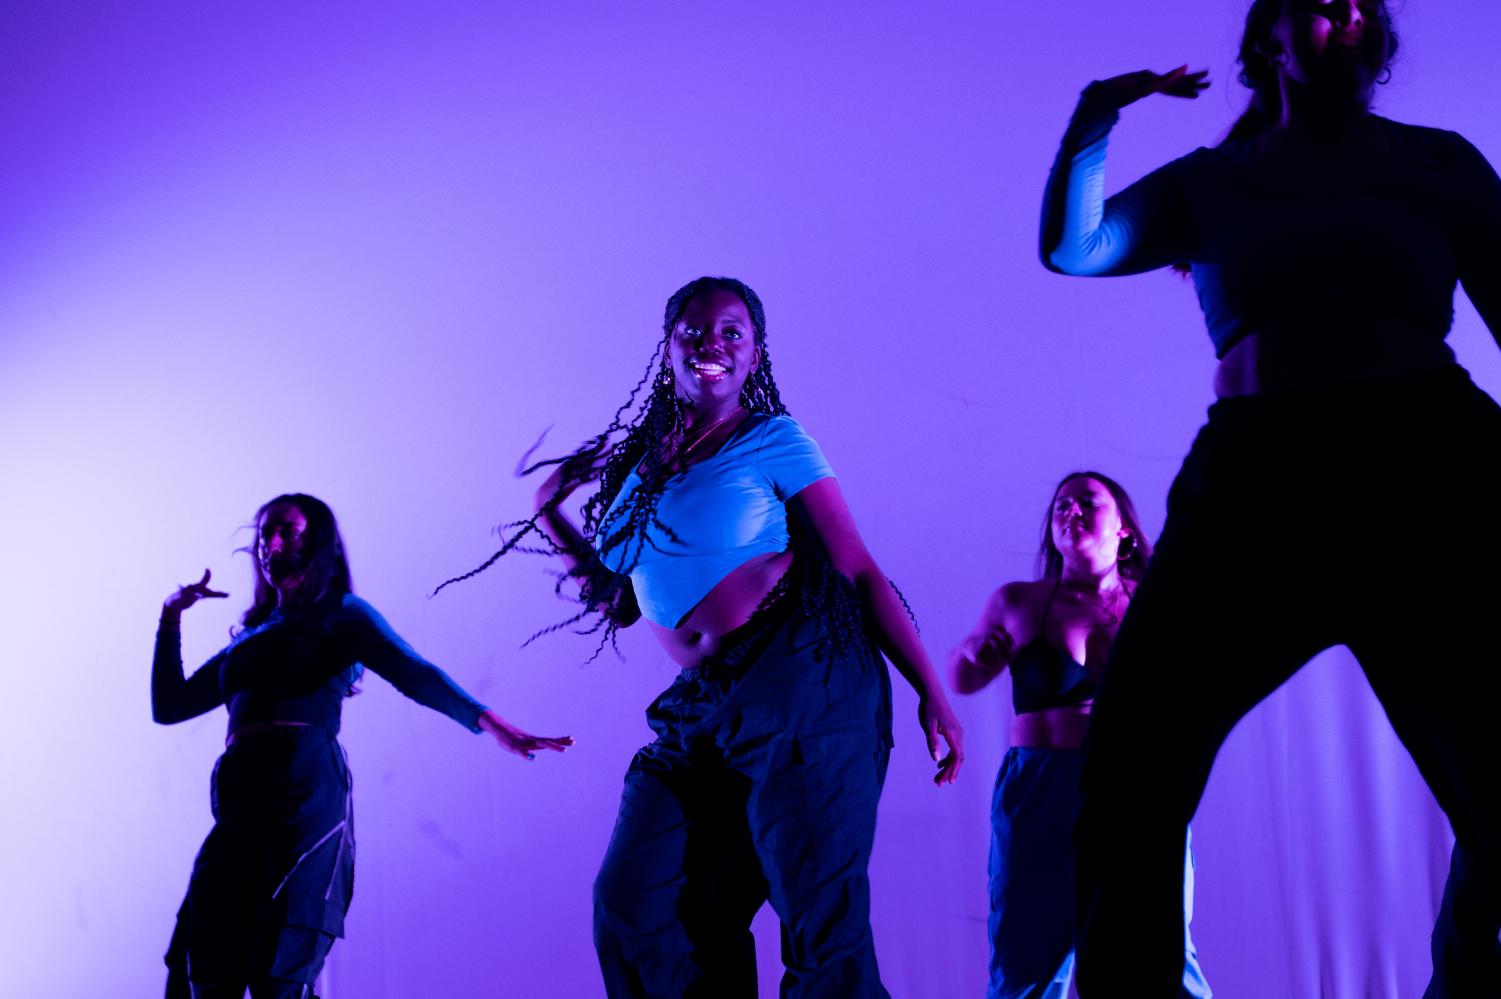 A dancer in the middle of a formation wearing a blue top and black pants smiles. 